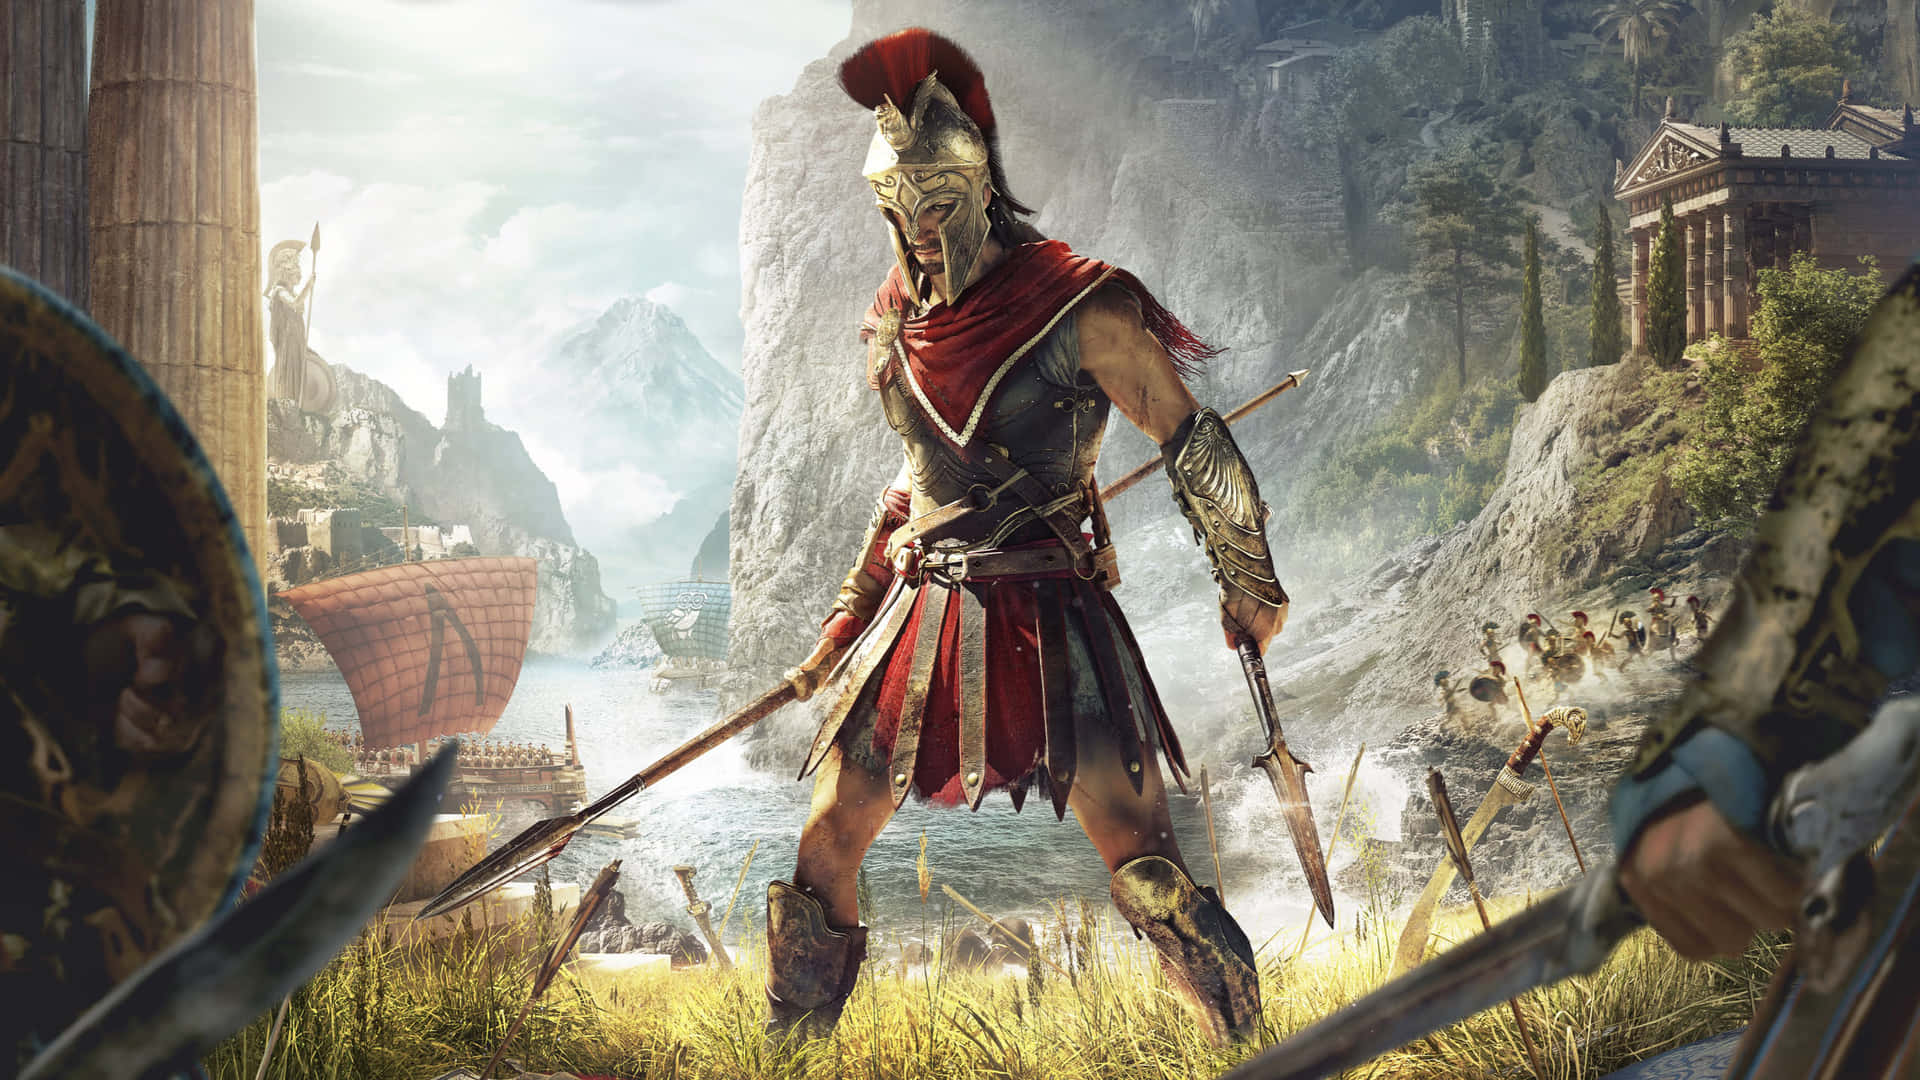 Alexios Spartan Armor 1440p Assassin's Creed Odyssey Background